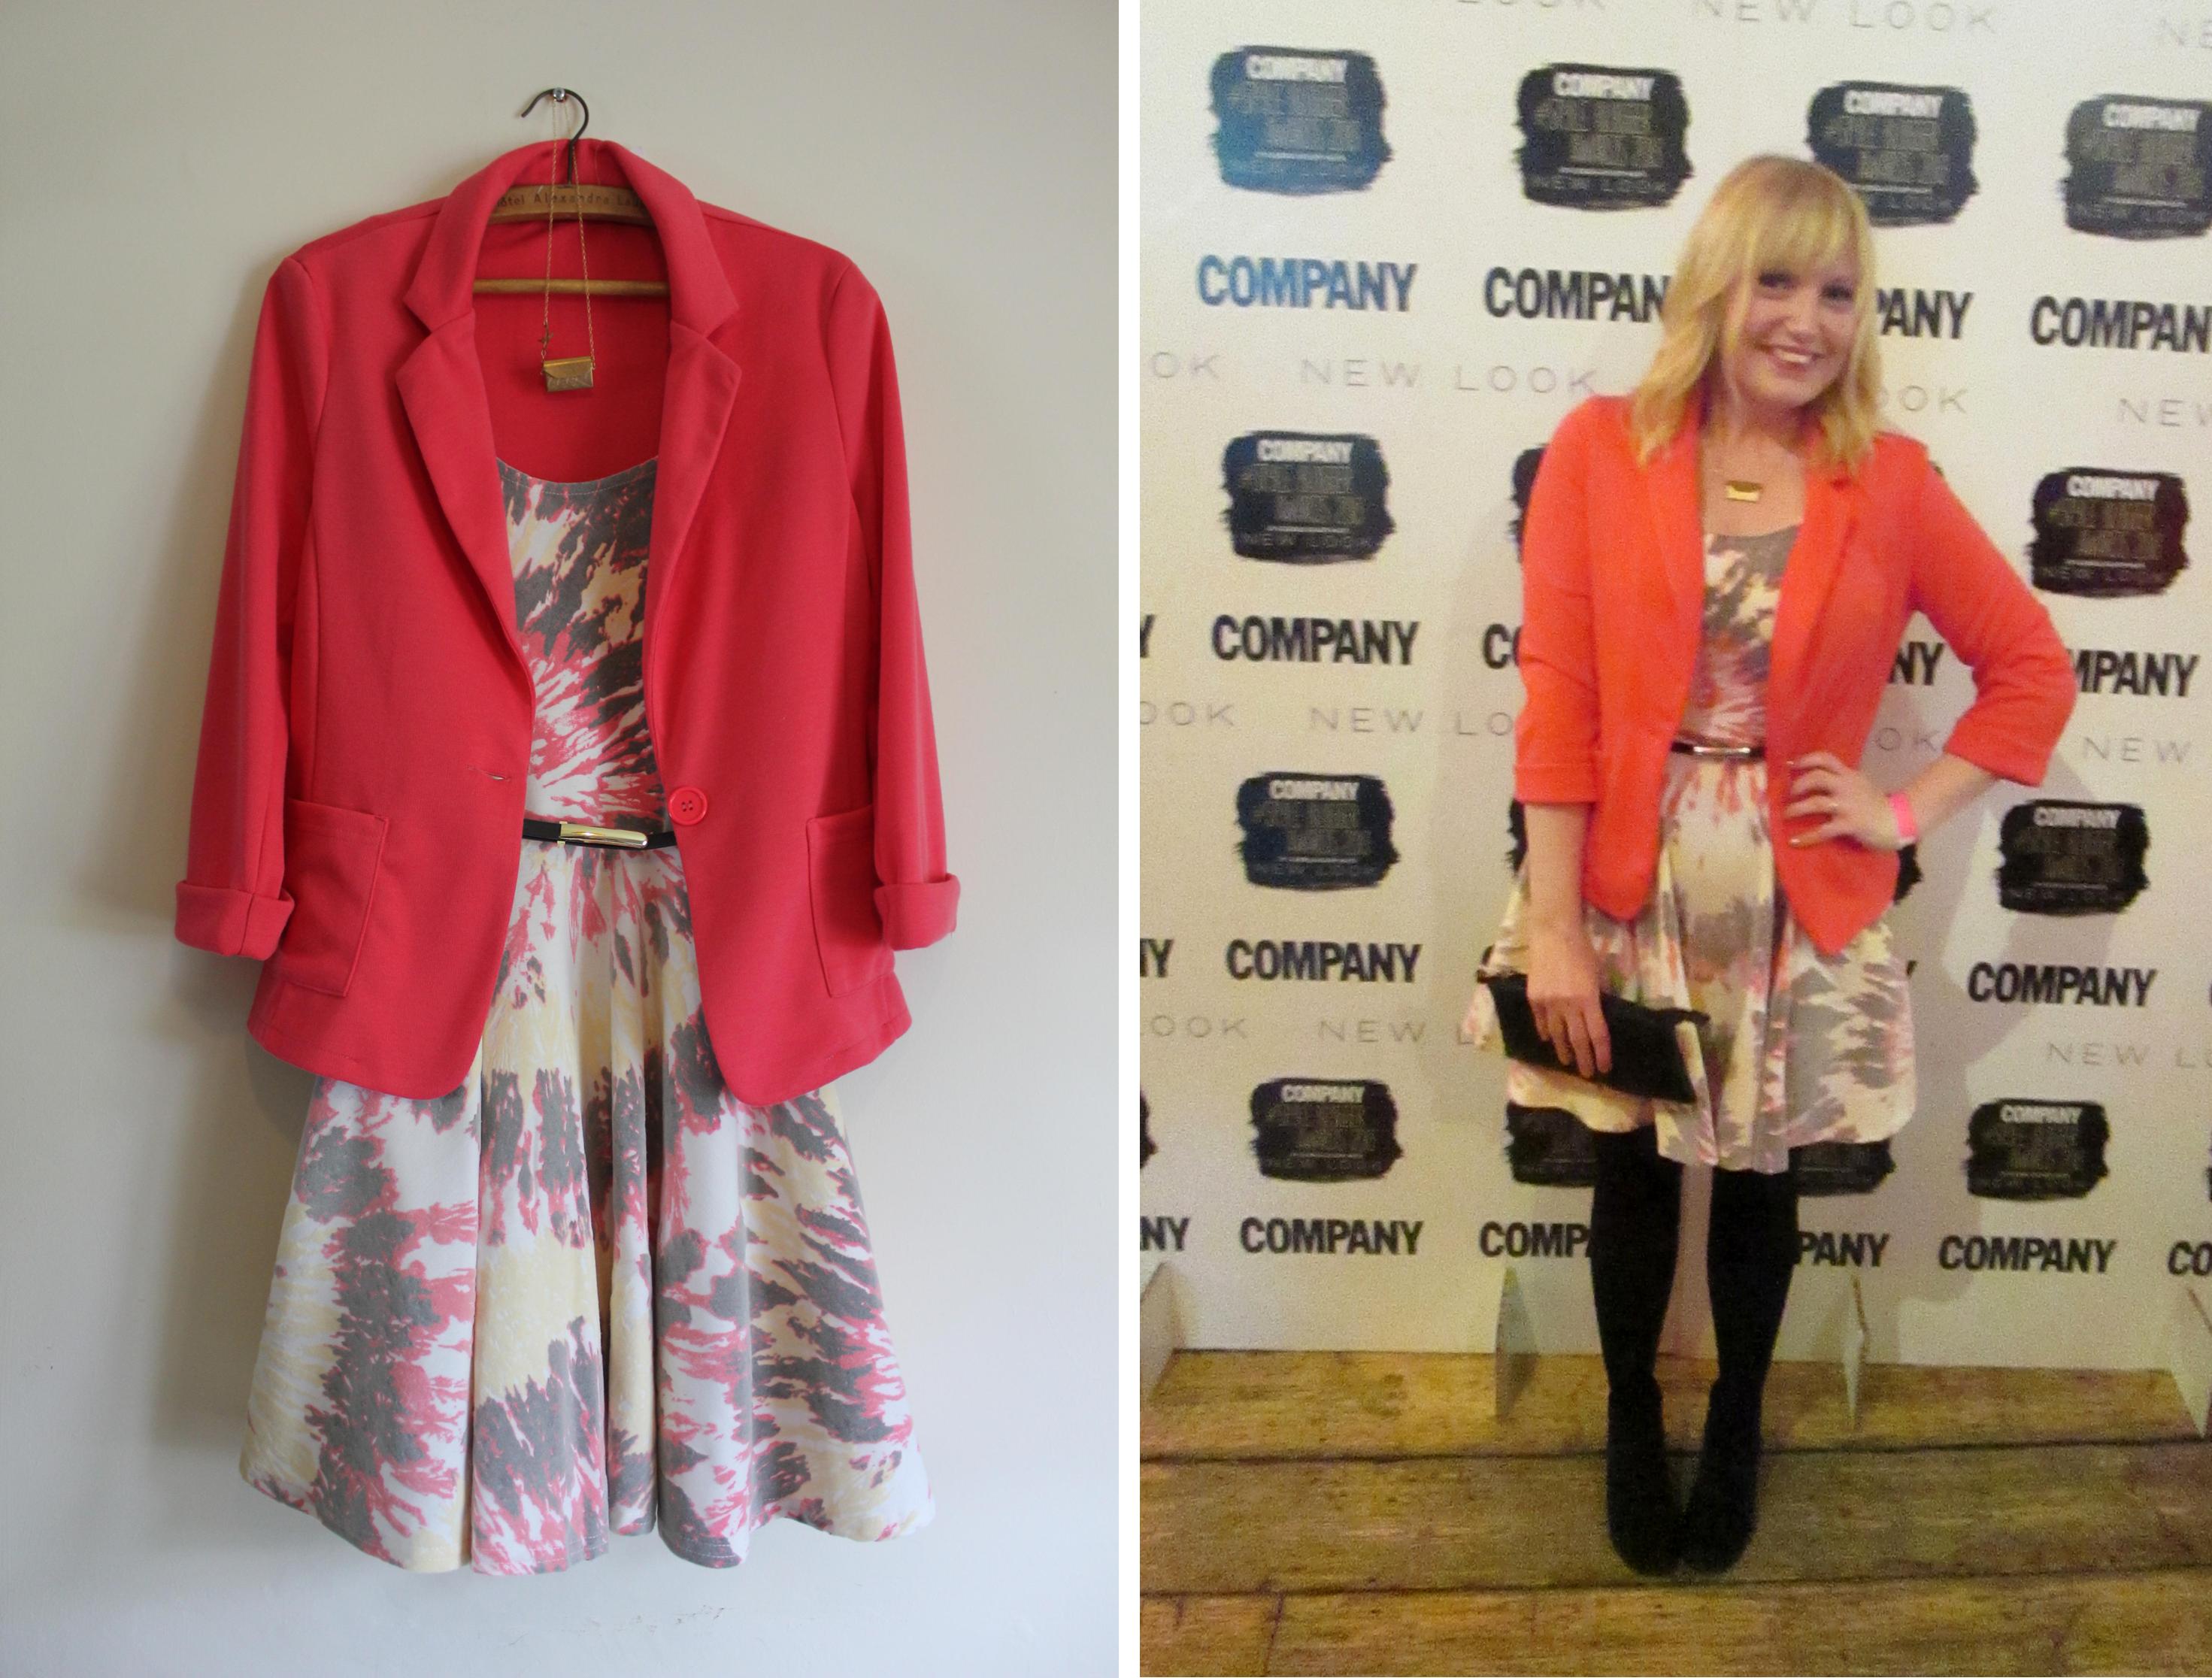 Outfit for Company magazine style blogger awards from Apricot and New Look